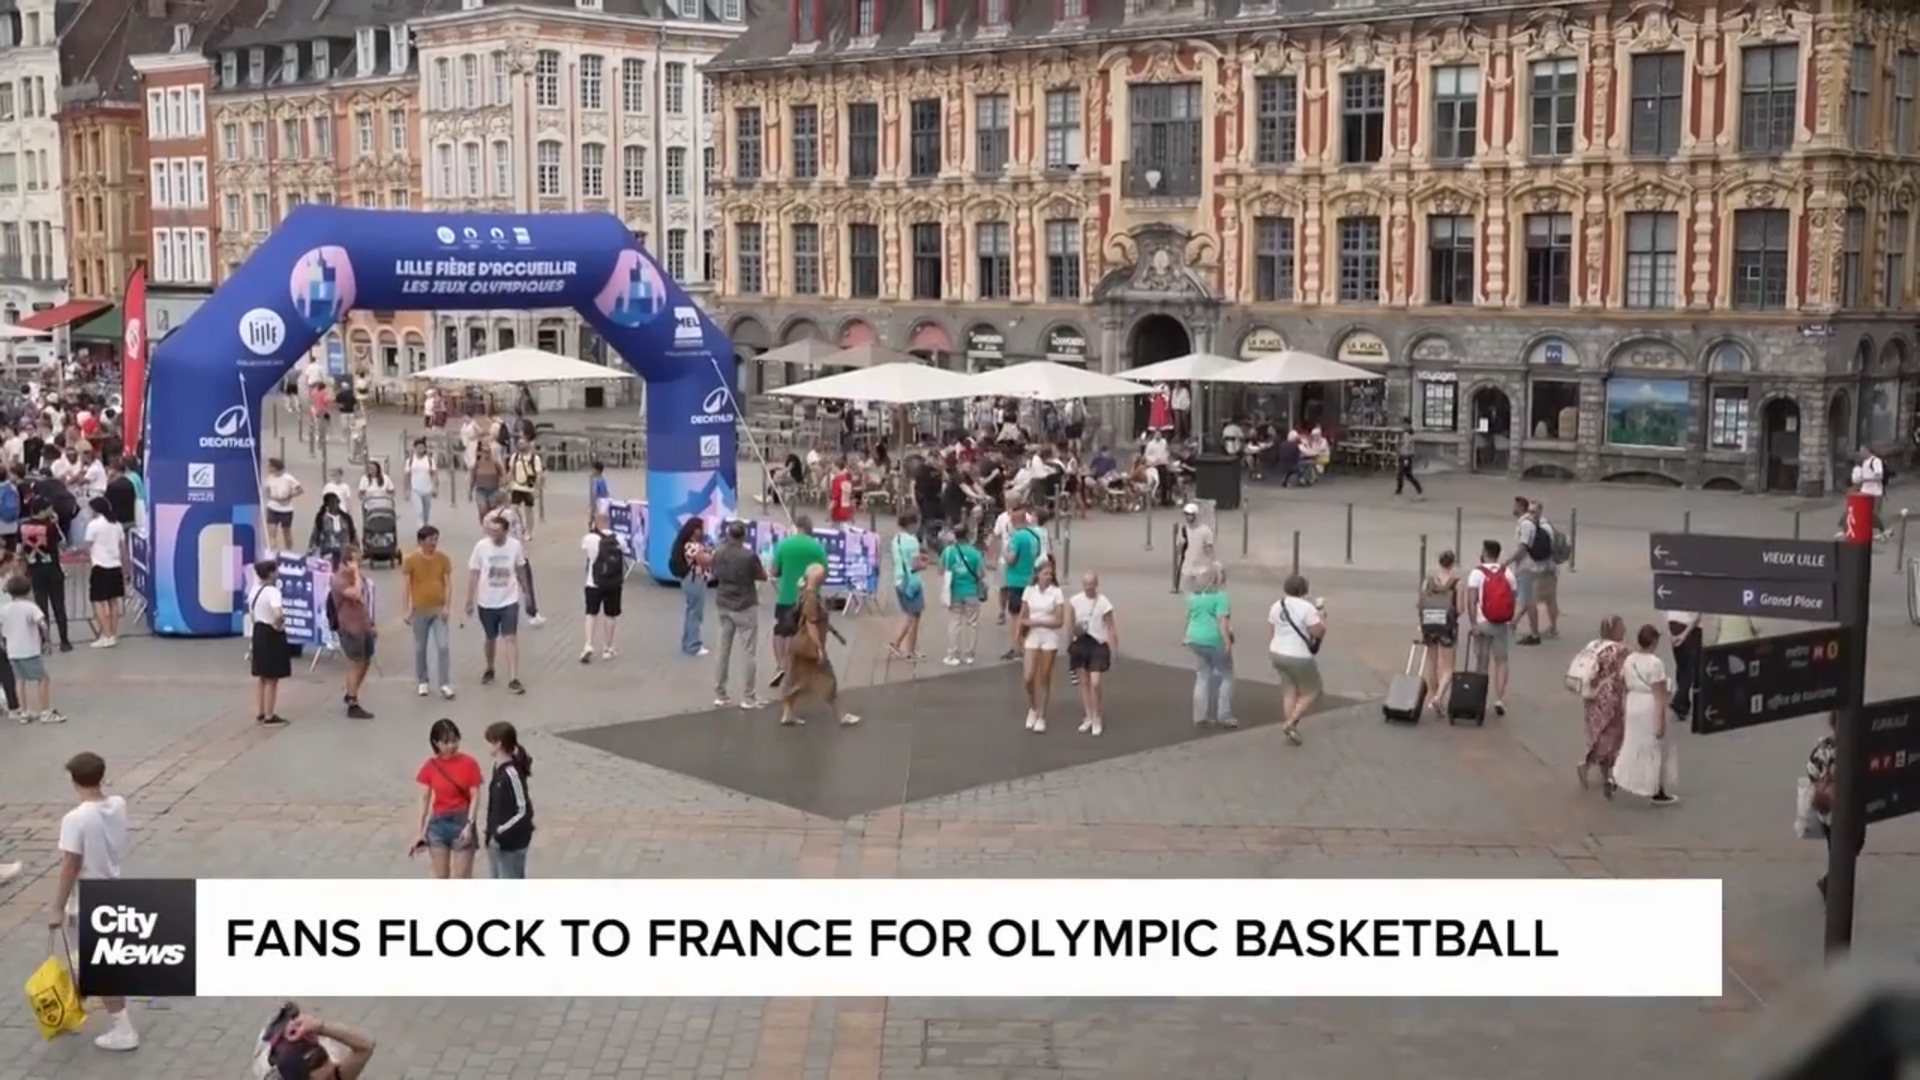 Fans Flock to France to see Olympic Basketball stars